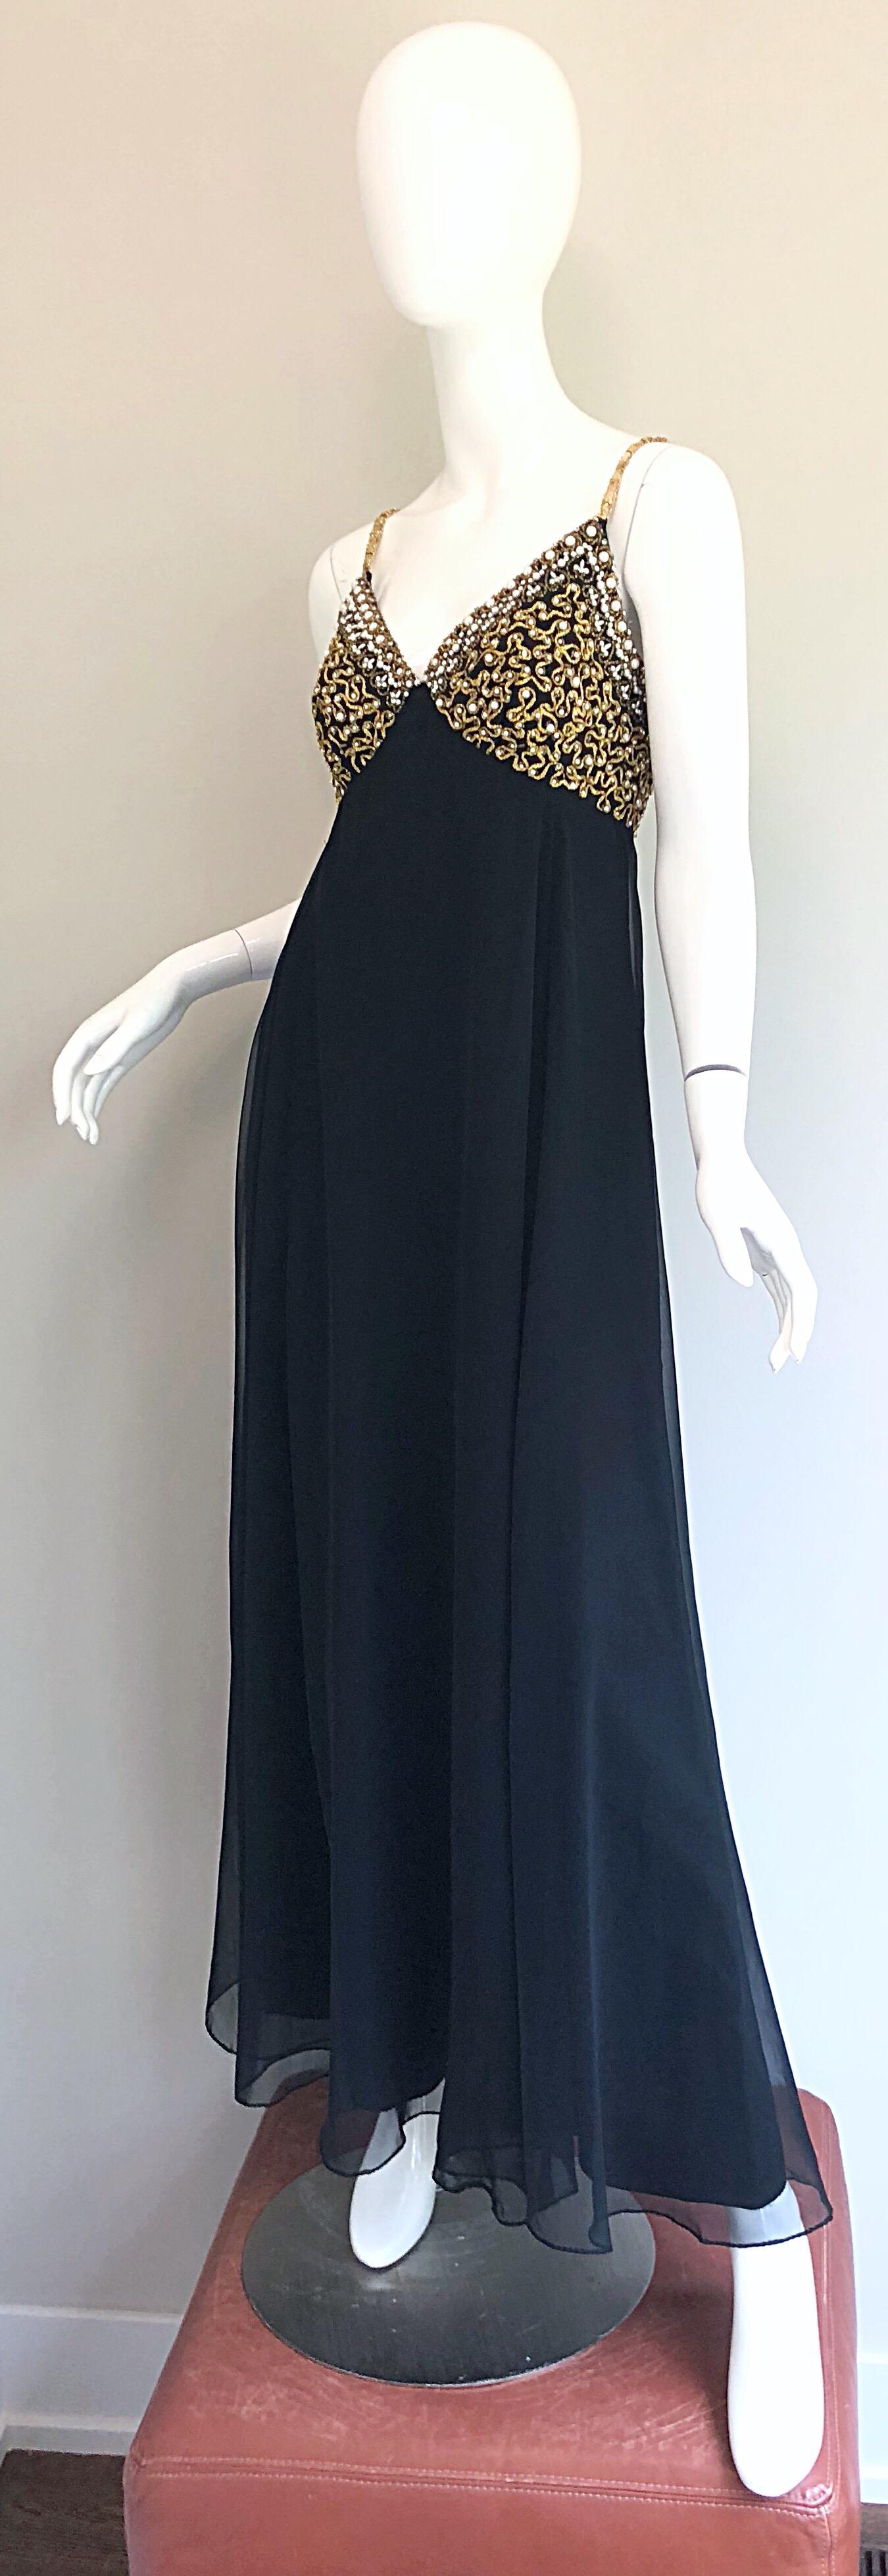 Women's 1970s Black + Gold Pearl + Rhinestone Encrusted Vintage 70s Chiffon Evening Gown For Sale